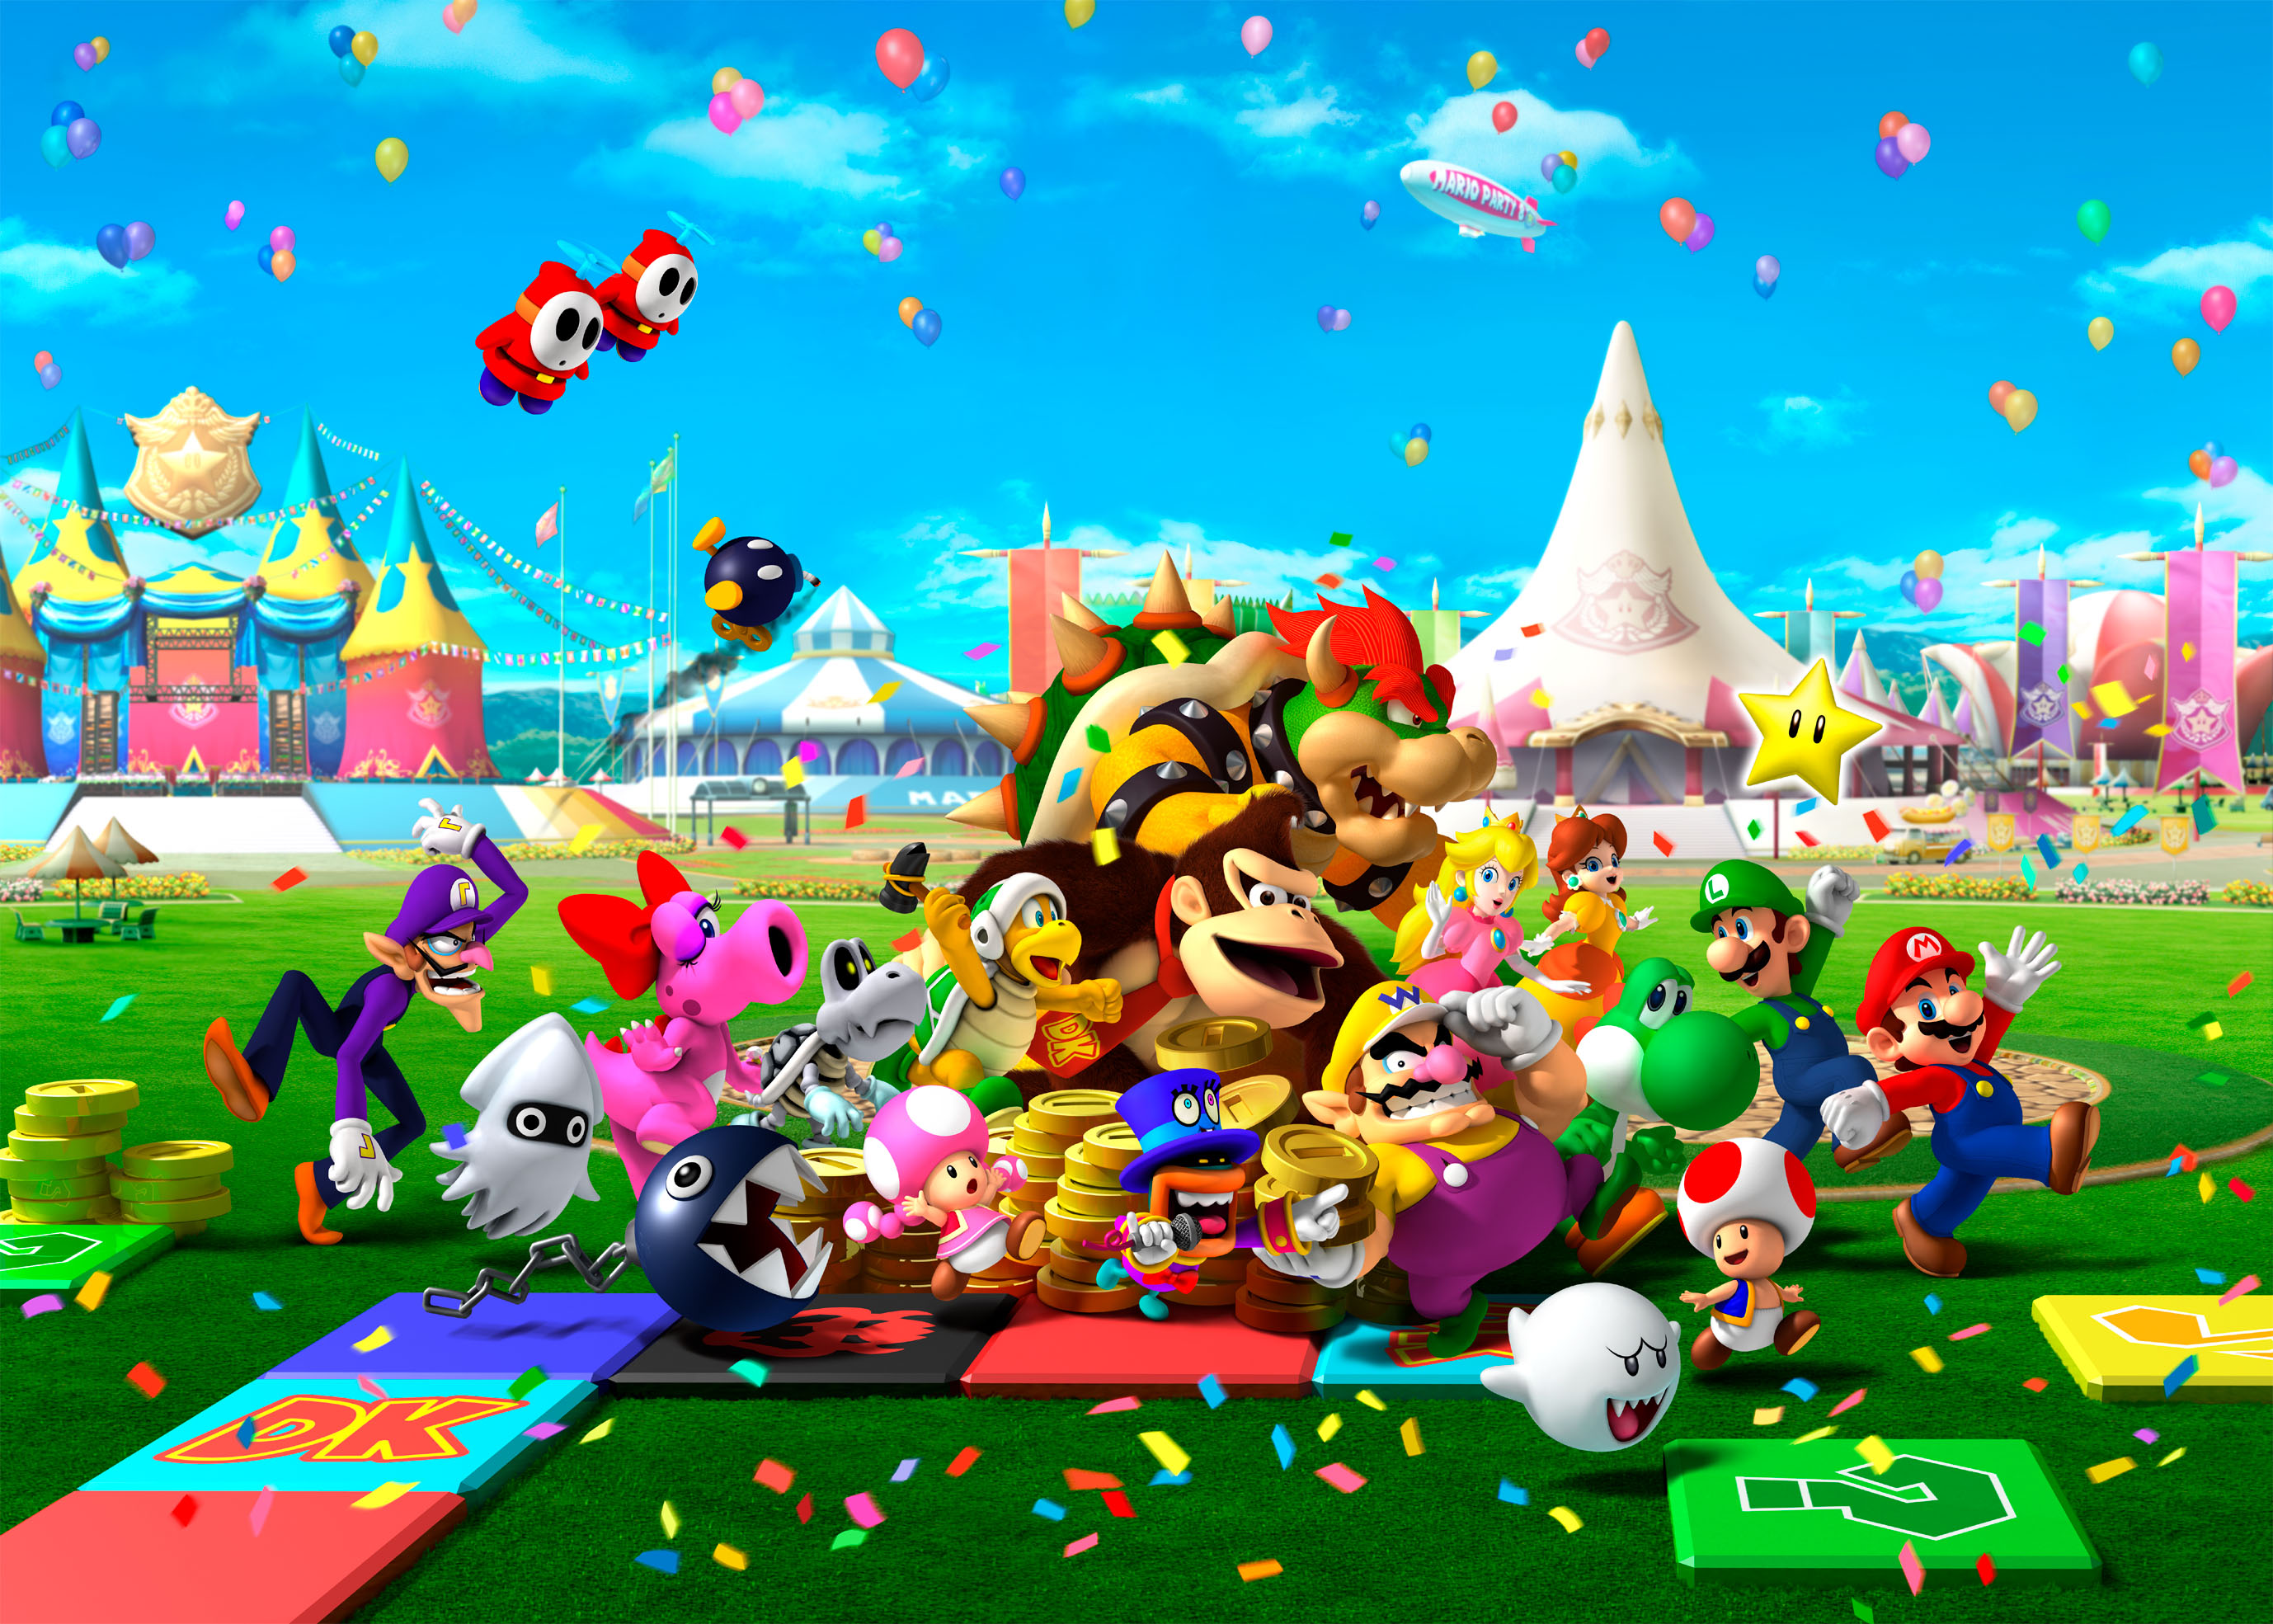 A promotional image for Mario Party 8, used for the game cover